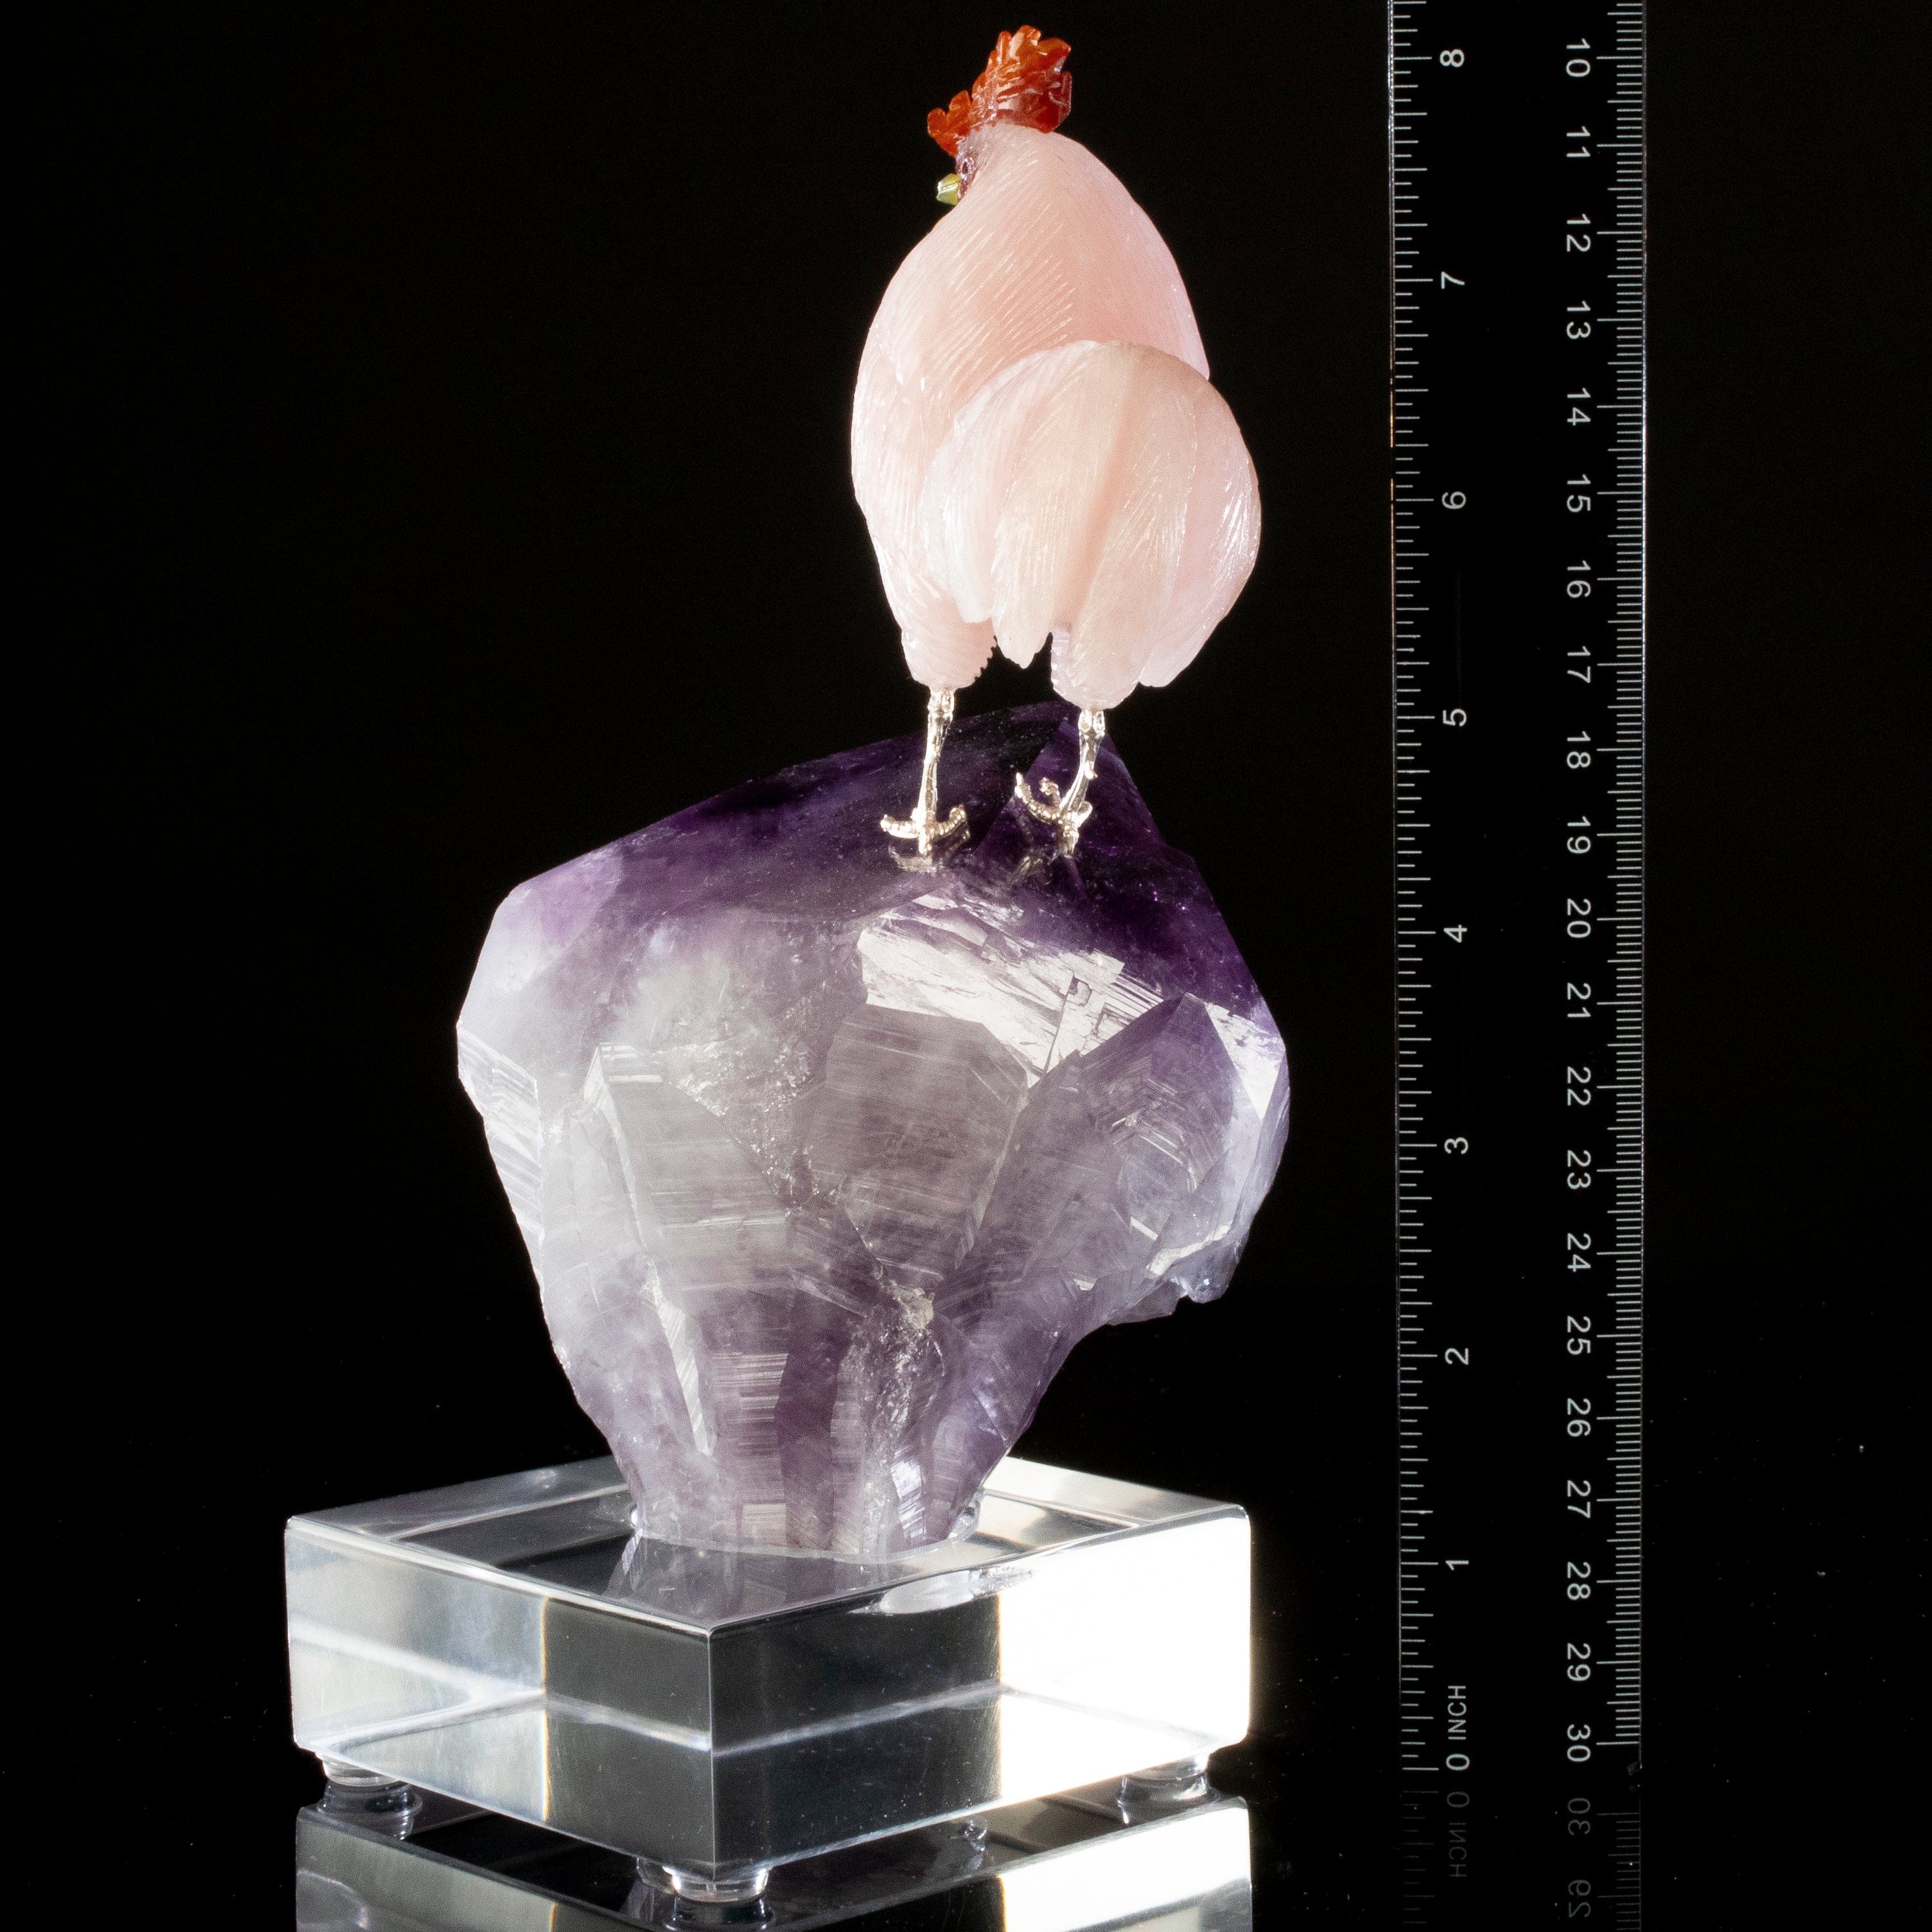 Kalifano Love Birds Carvings Rose Quartz Rooster Love Bird Carving on Amethyst Point Base LB.A127.002